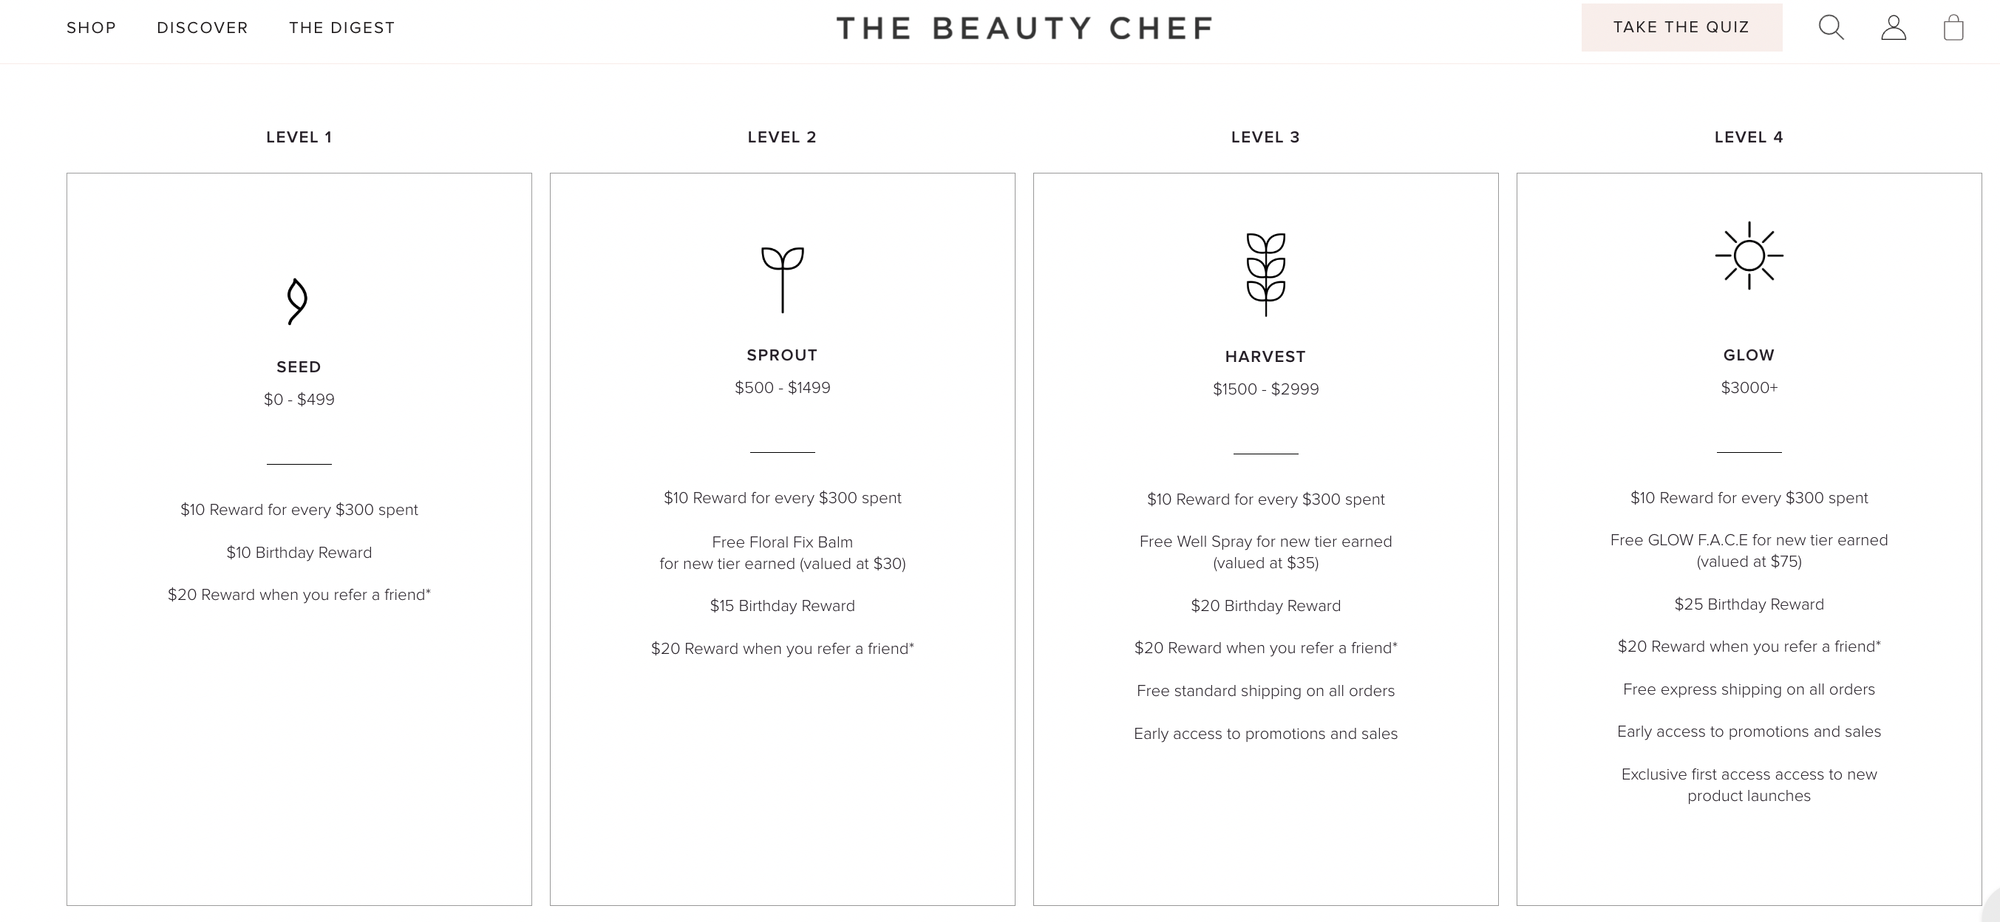 screenshot of ecommerce brand the beauty chef's VIP tiers for its rewards program